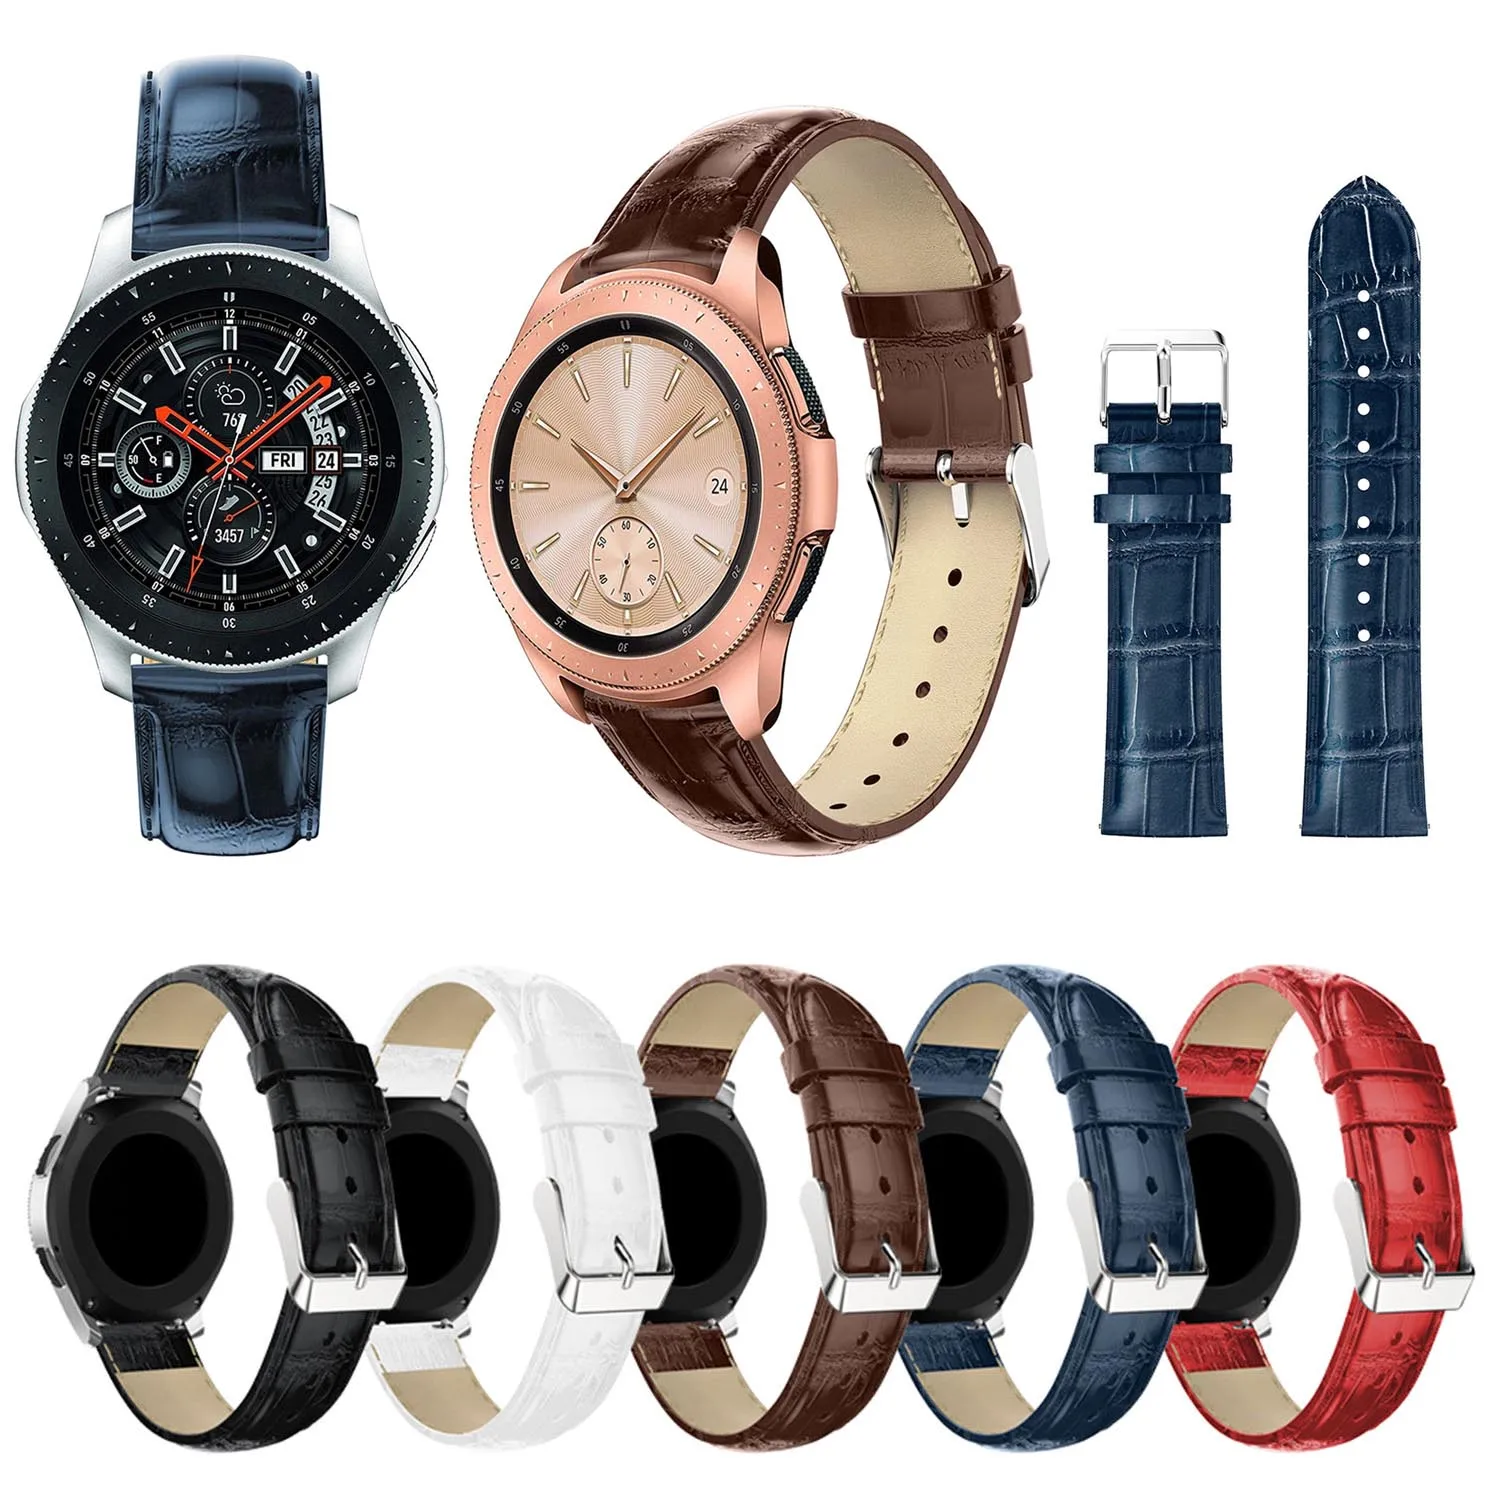 

22mm 20mm Crocodile Strap For Samsung Gear Sport S2 S3 Classic Frontier Galaxy Watch 42 46mm Band Huami Amazfit Bip Huawei GT 2